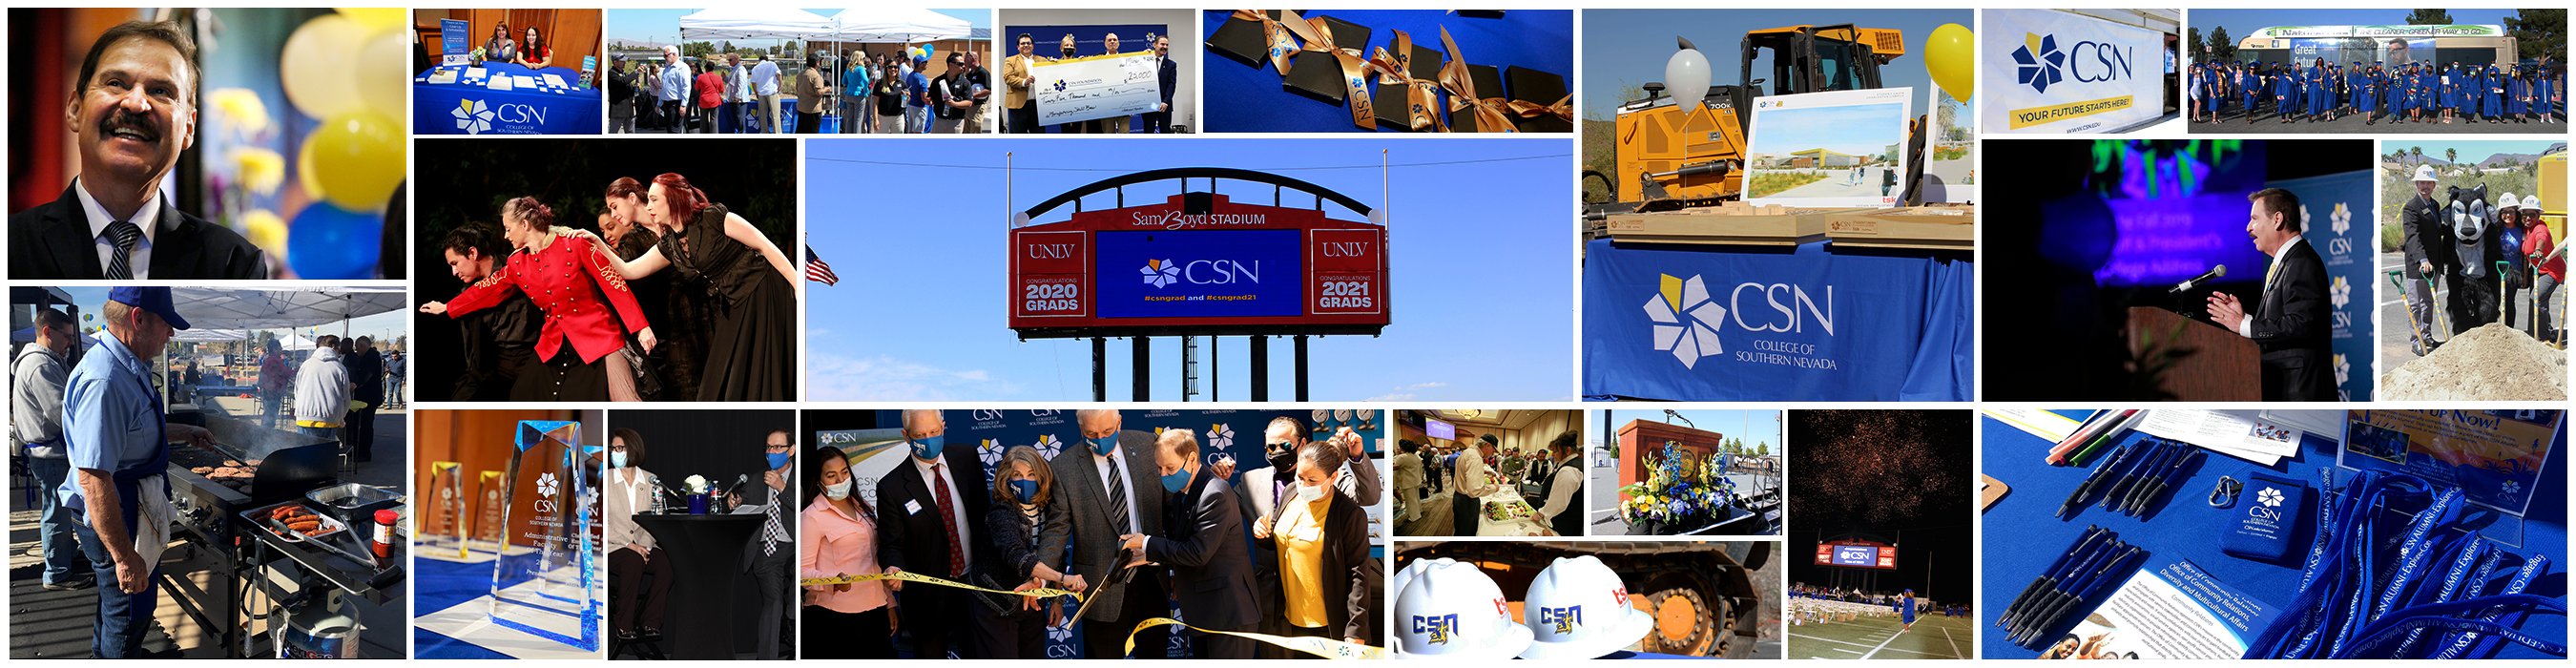 picture collage of past, CSN events